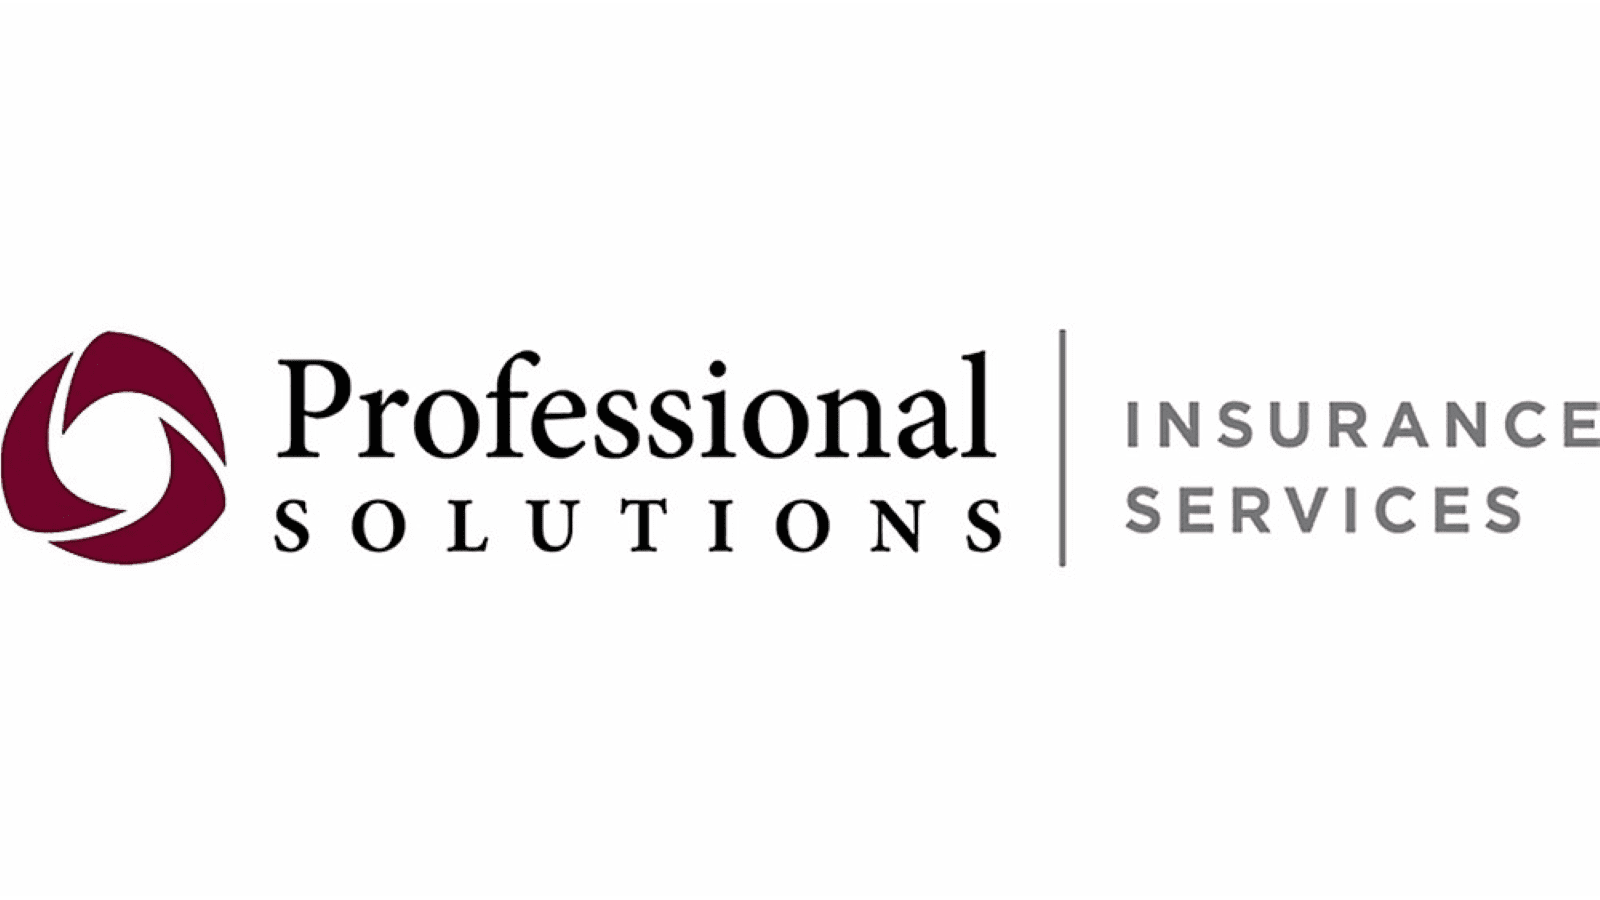 Professional solutions insurance services